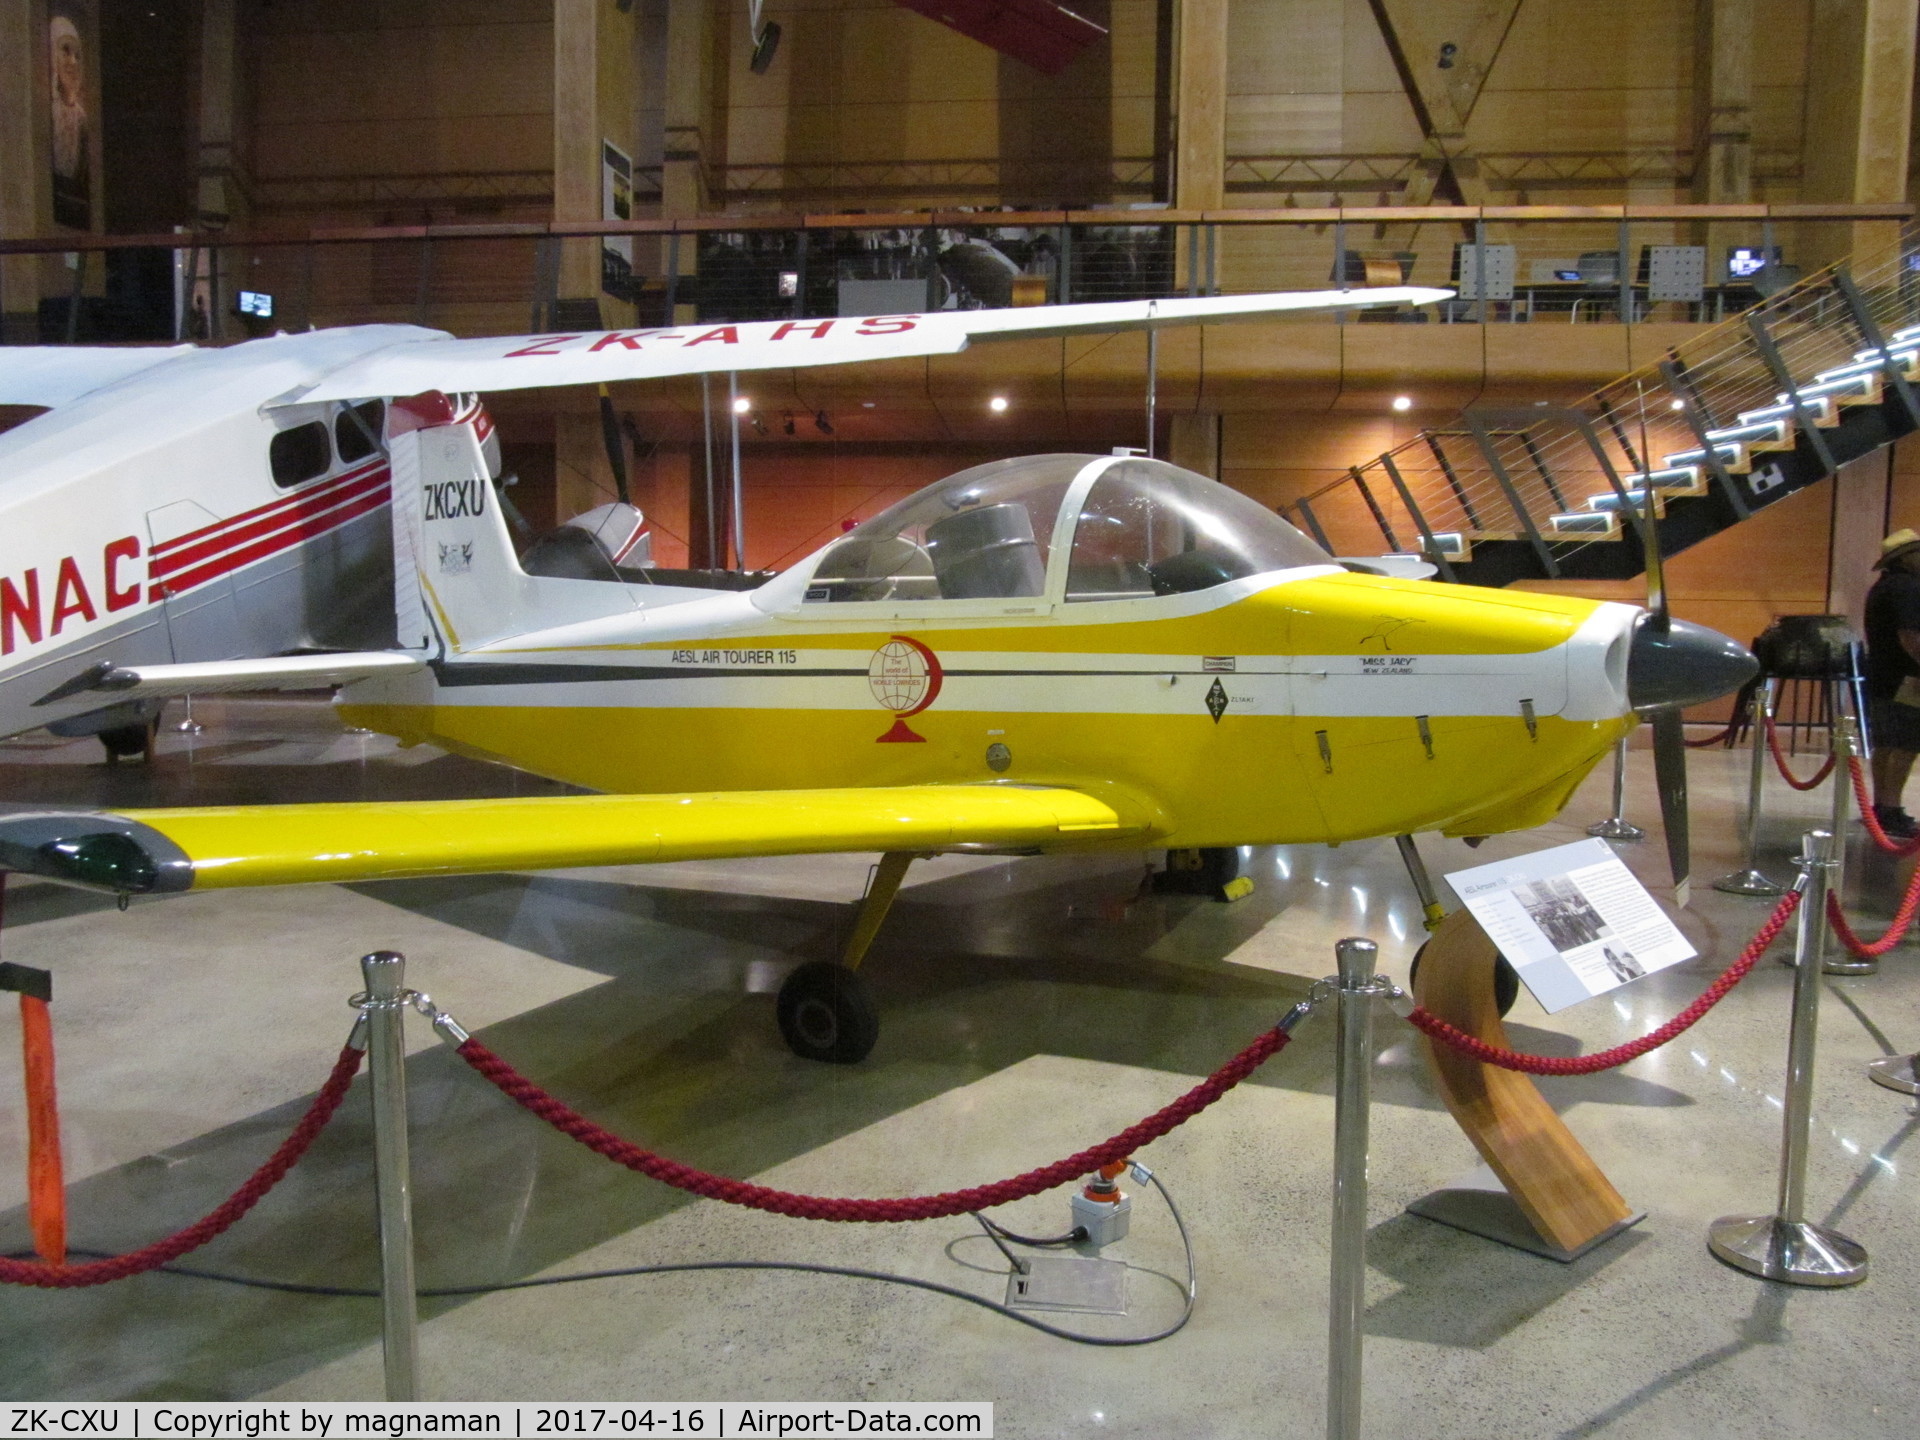 ZK-CXU, Victa Airtourer 115 C/N 521, a few in museums in NZ